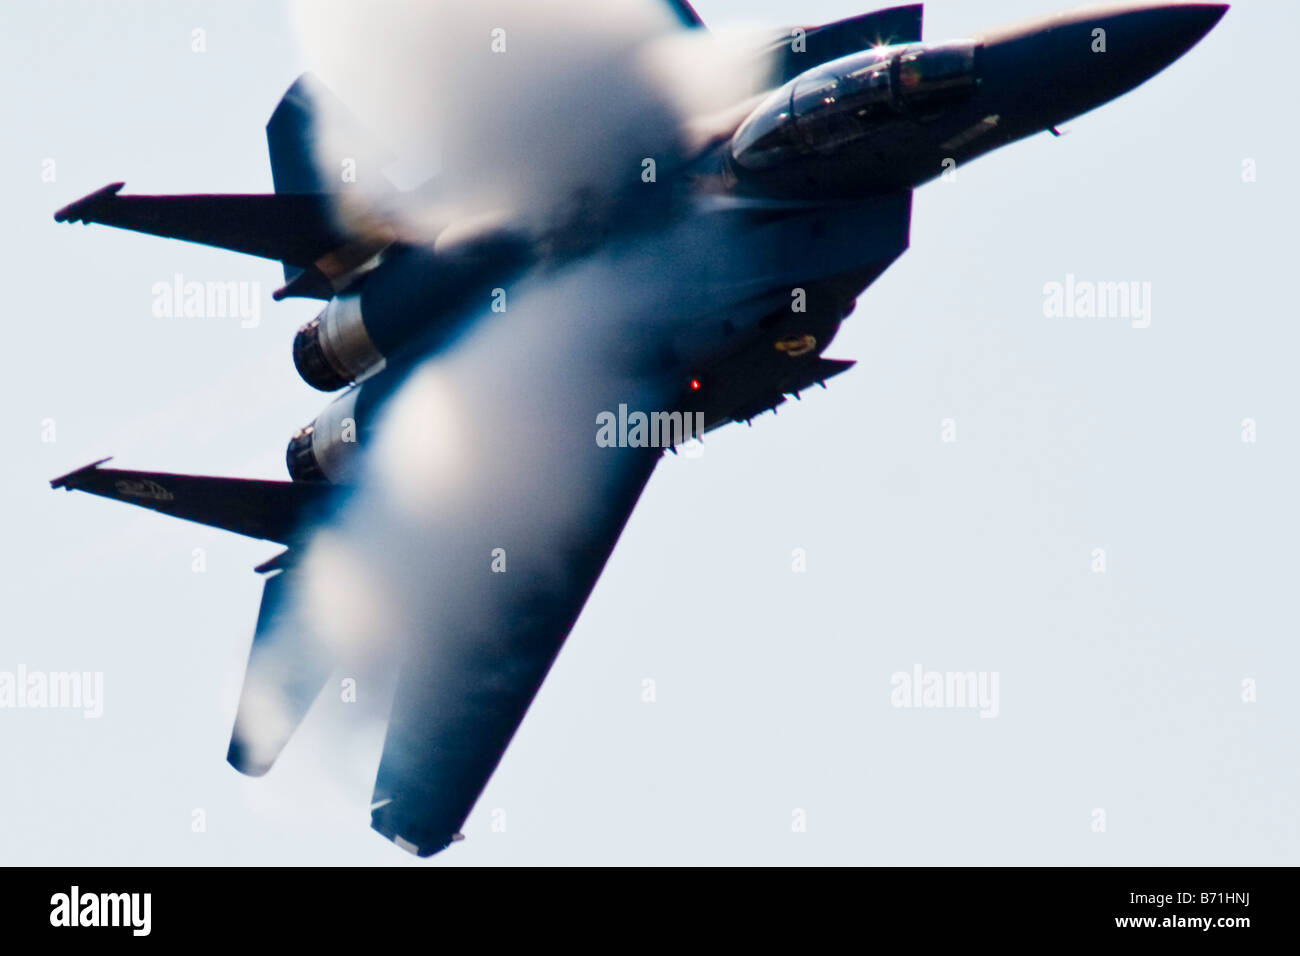 A vapor burst forms on the wings of an F 15 Strike Eagle in a high speed banked turn at low altitude Stock Photo